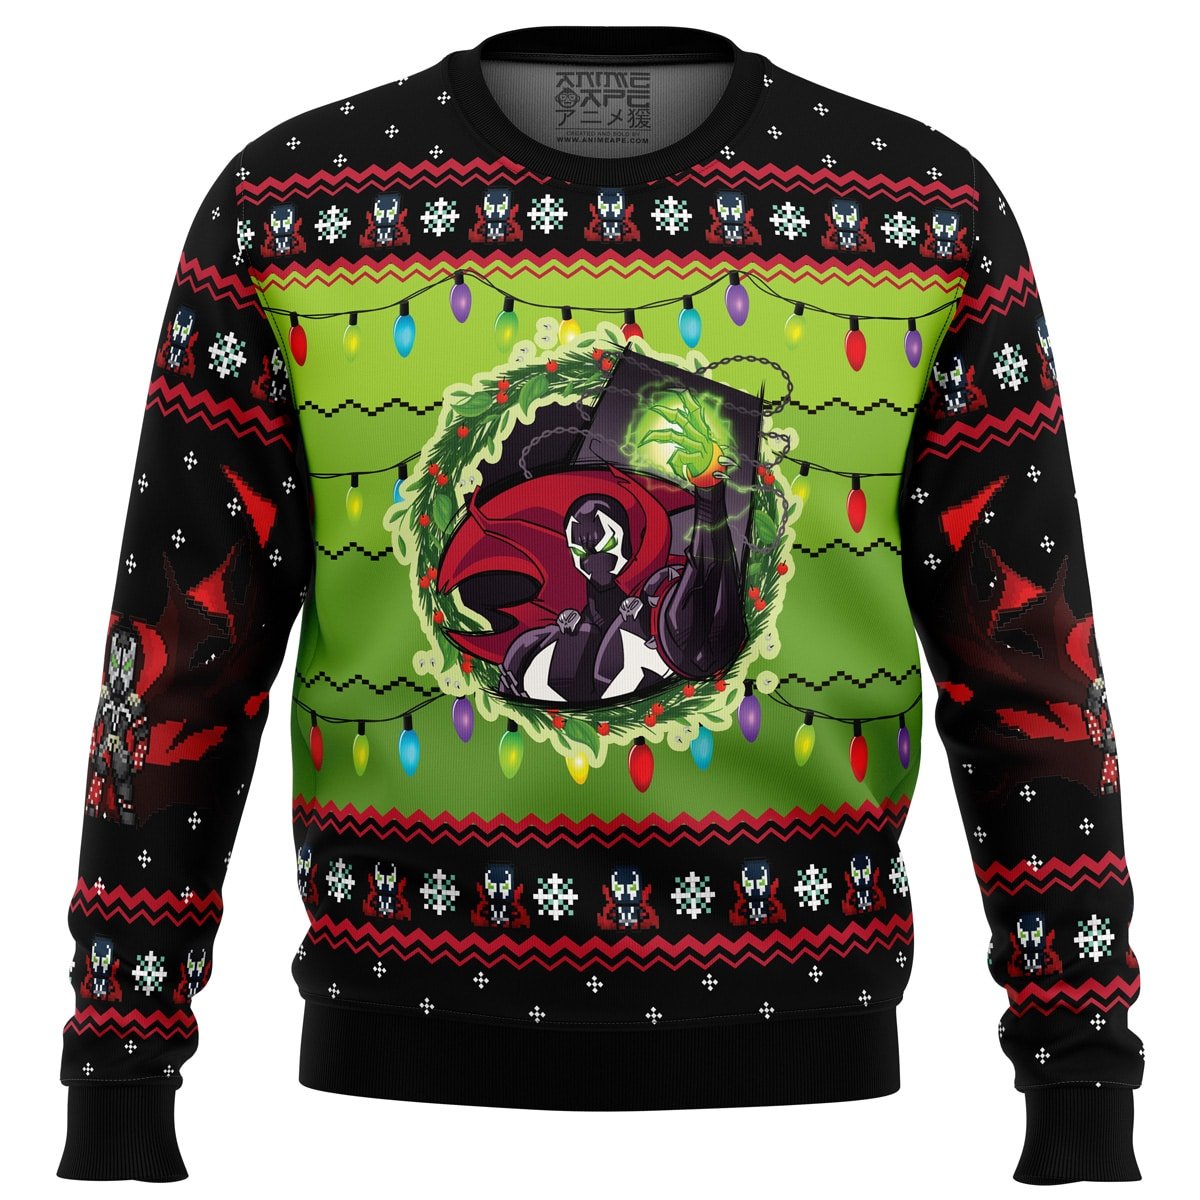 Spawn Ugly Christmas Sweater